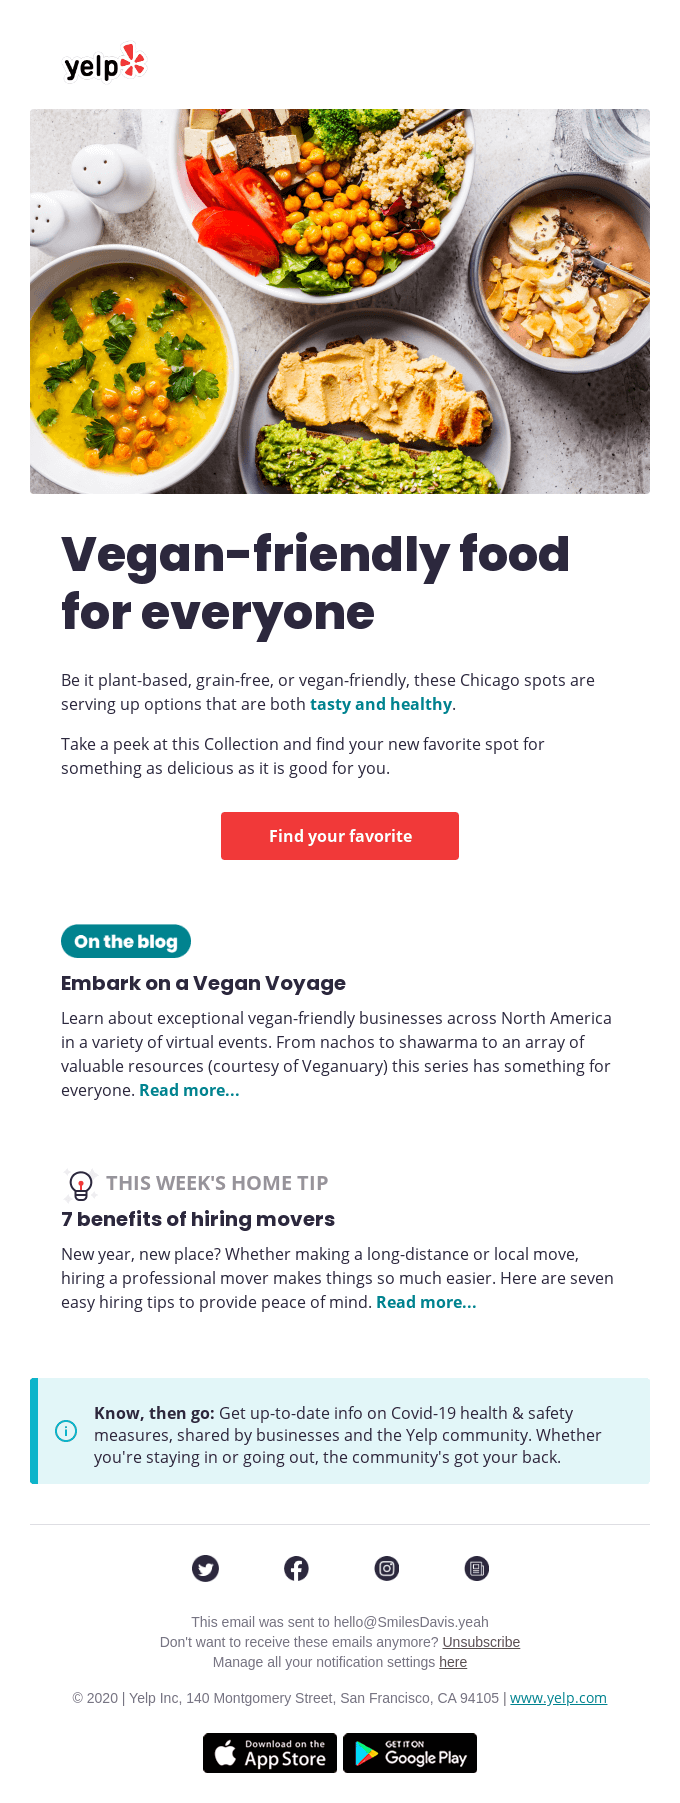 Would you believe it’s vegan? - Yelp Email Newsletter